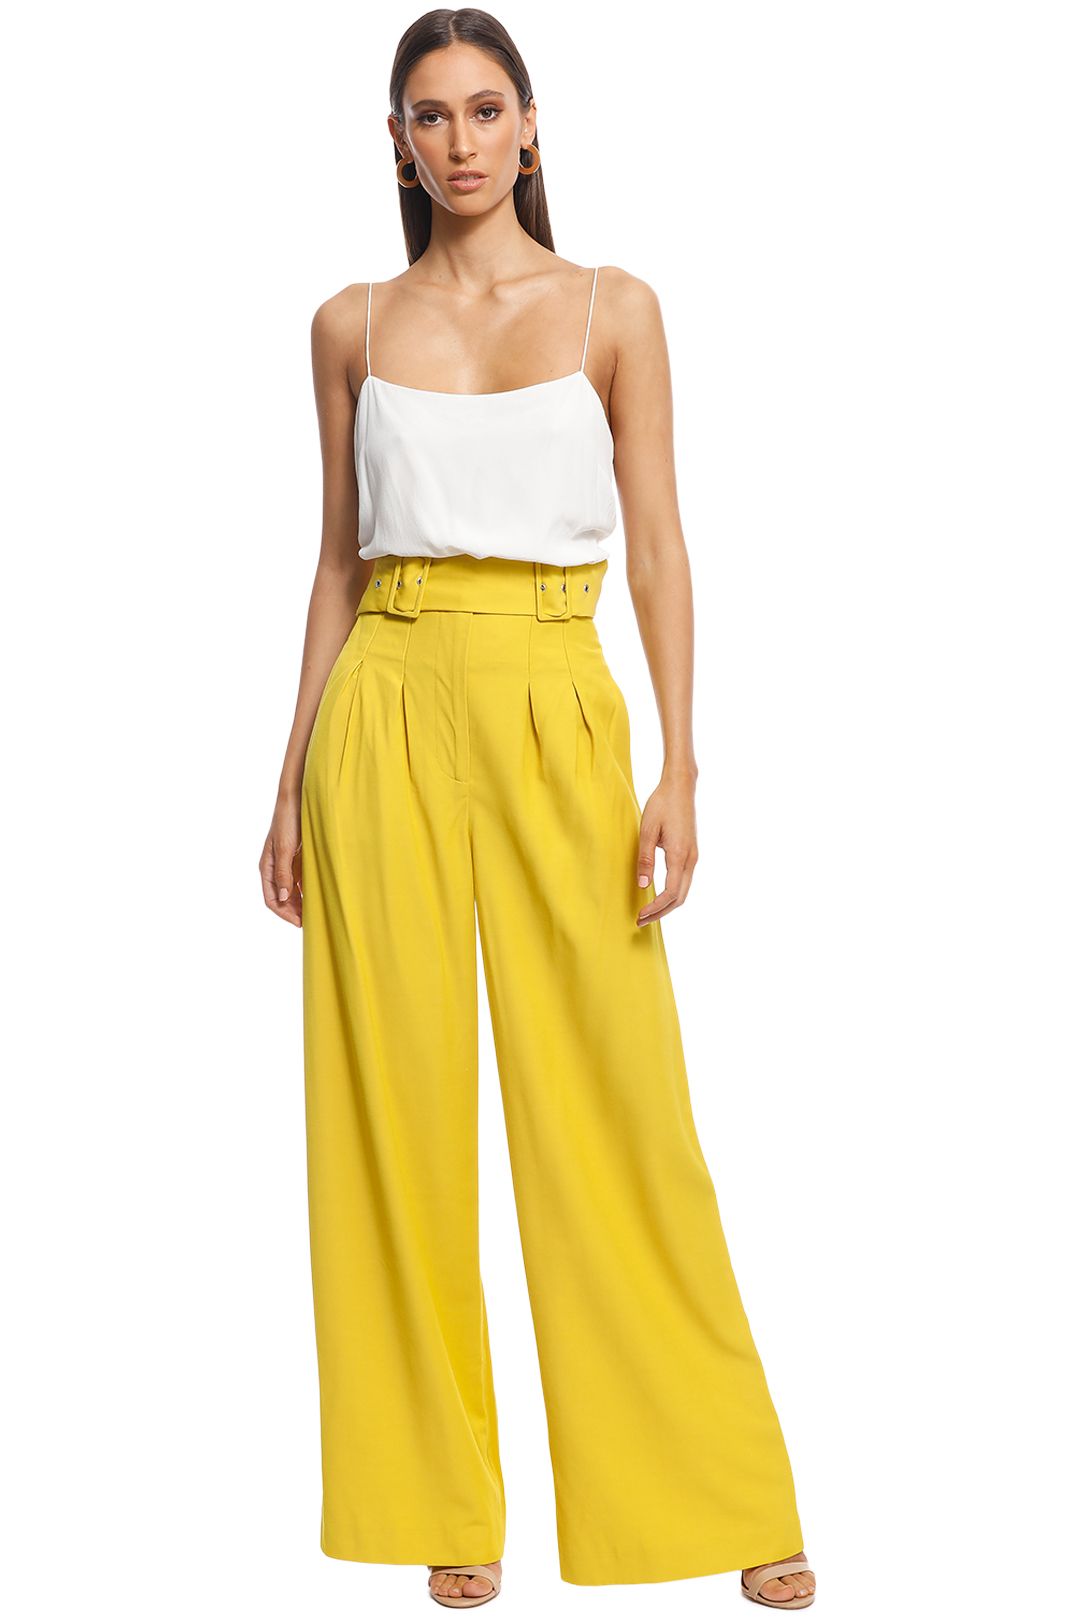 CMEO Collective - Silenced Pant - Yellow - Front